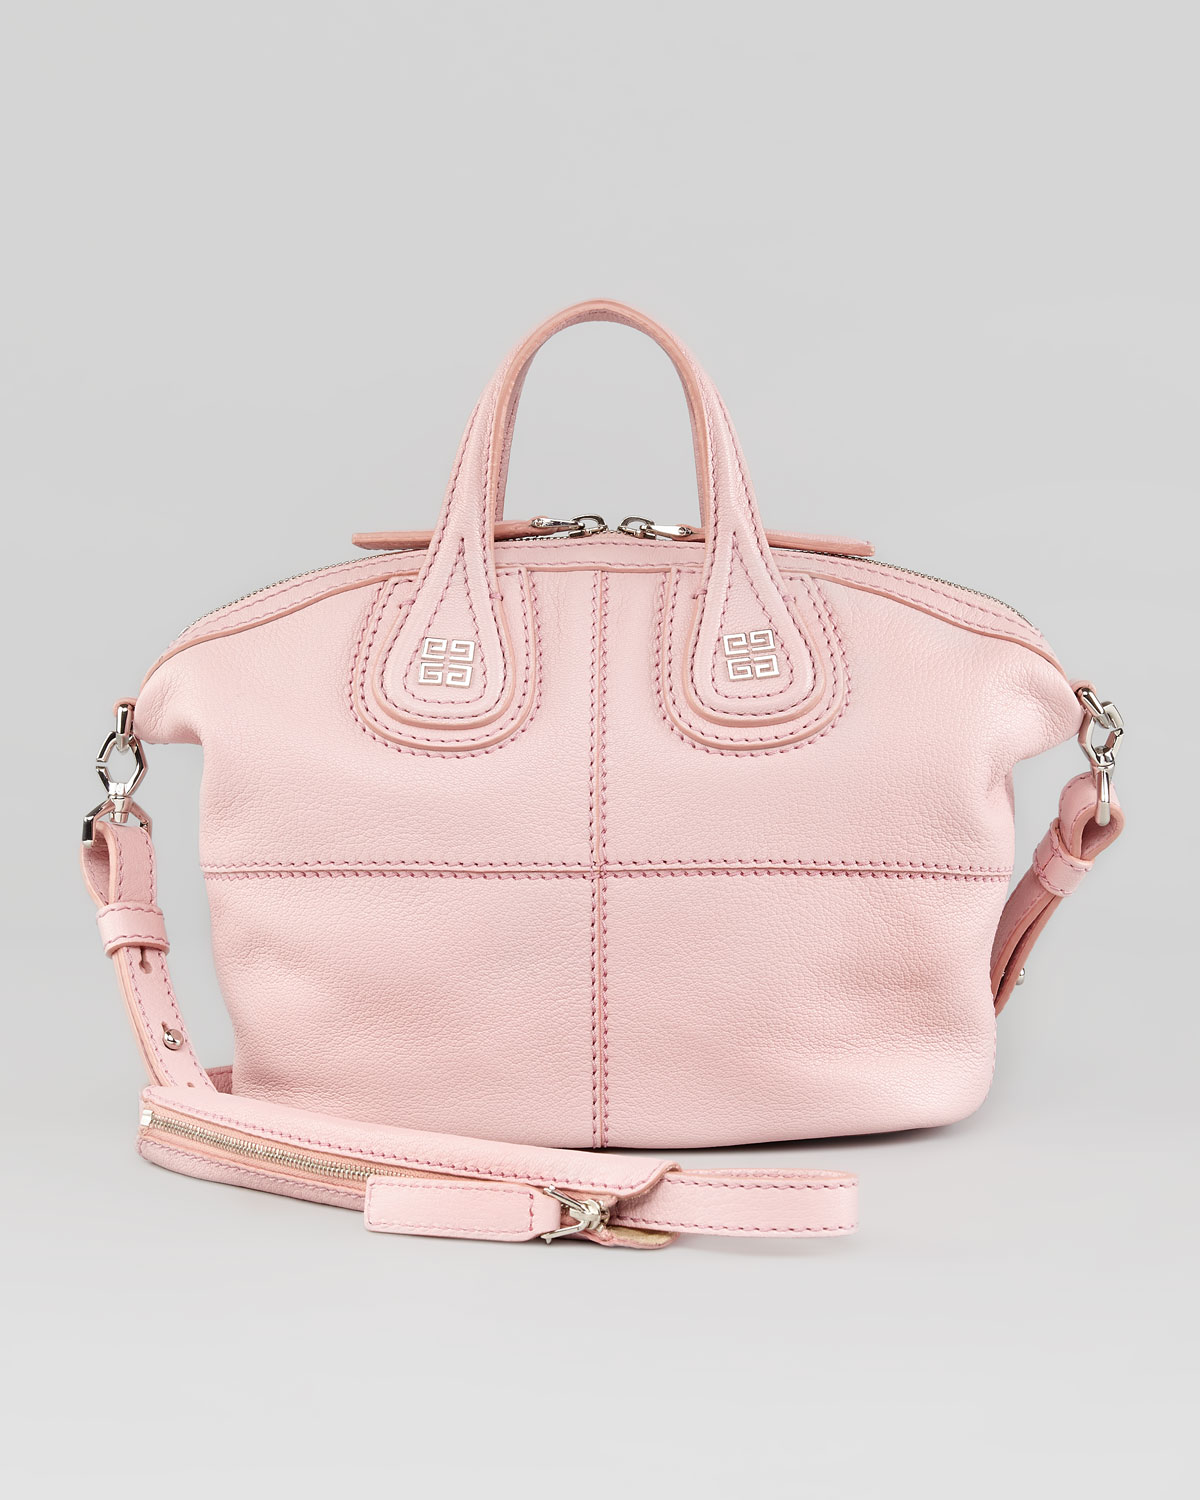 Givenchy Nightingale Mini Sugar Crossbody Bag Light Pink in Pink (LIGHT PINK) | Lyst